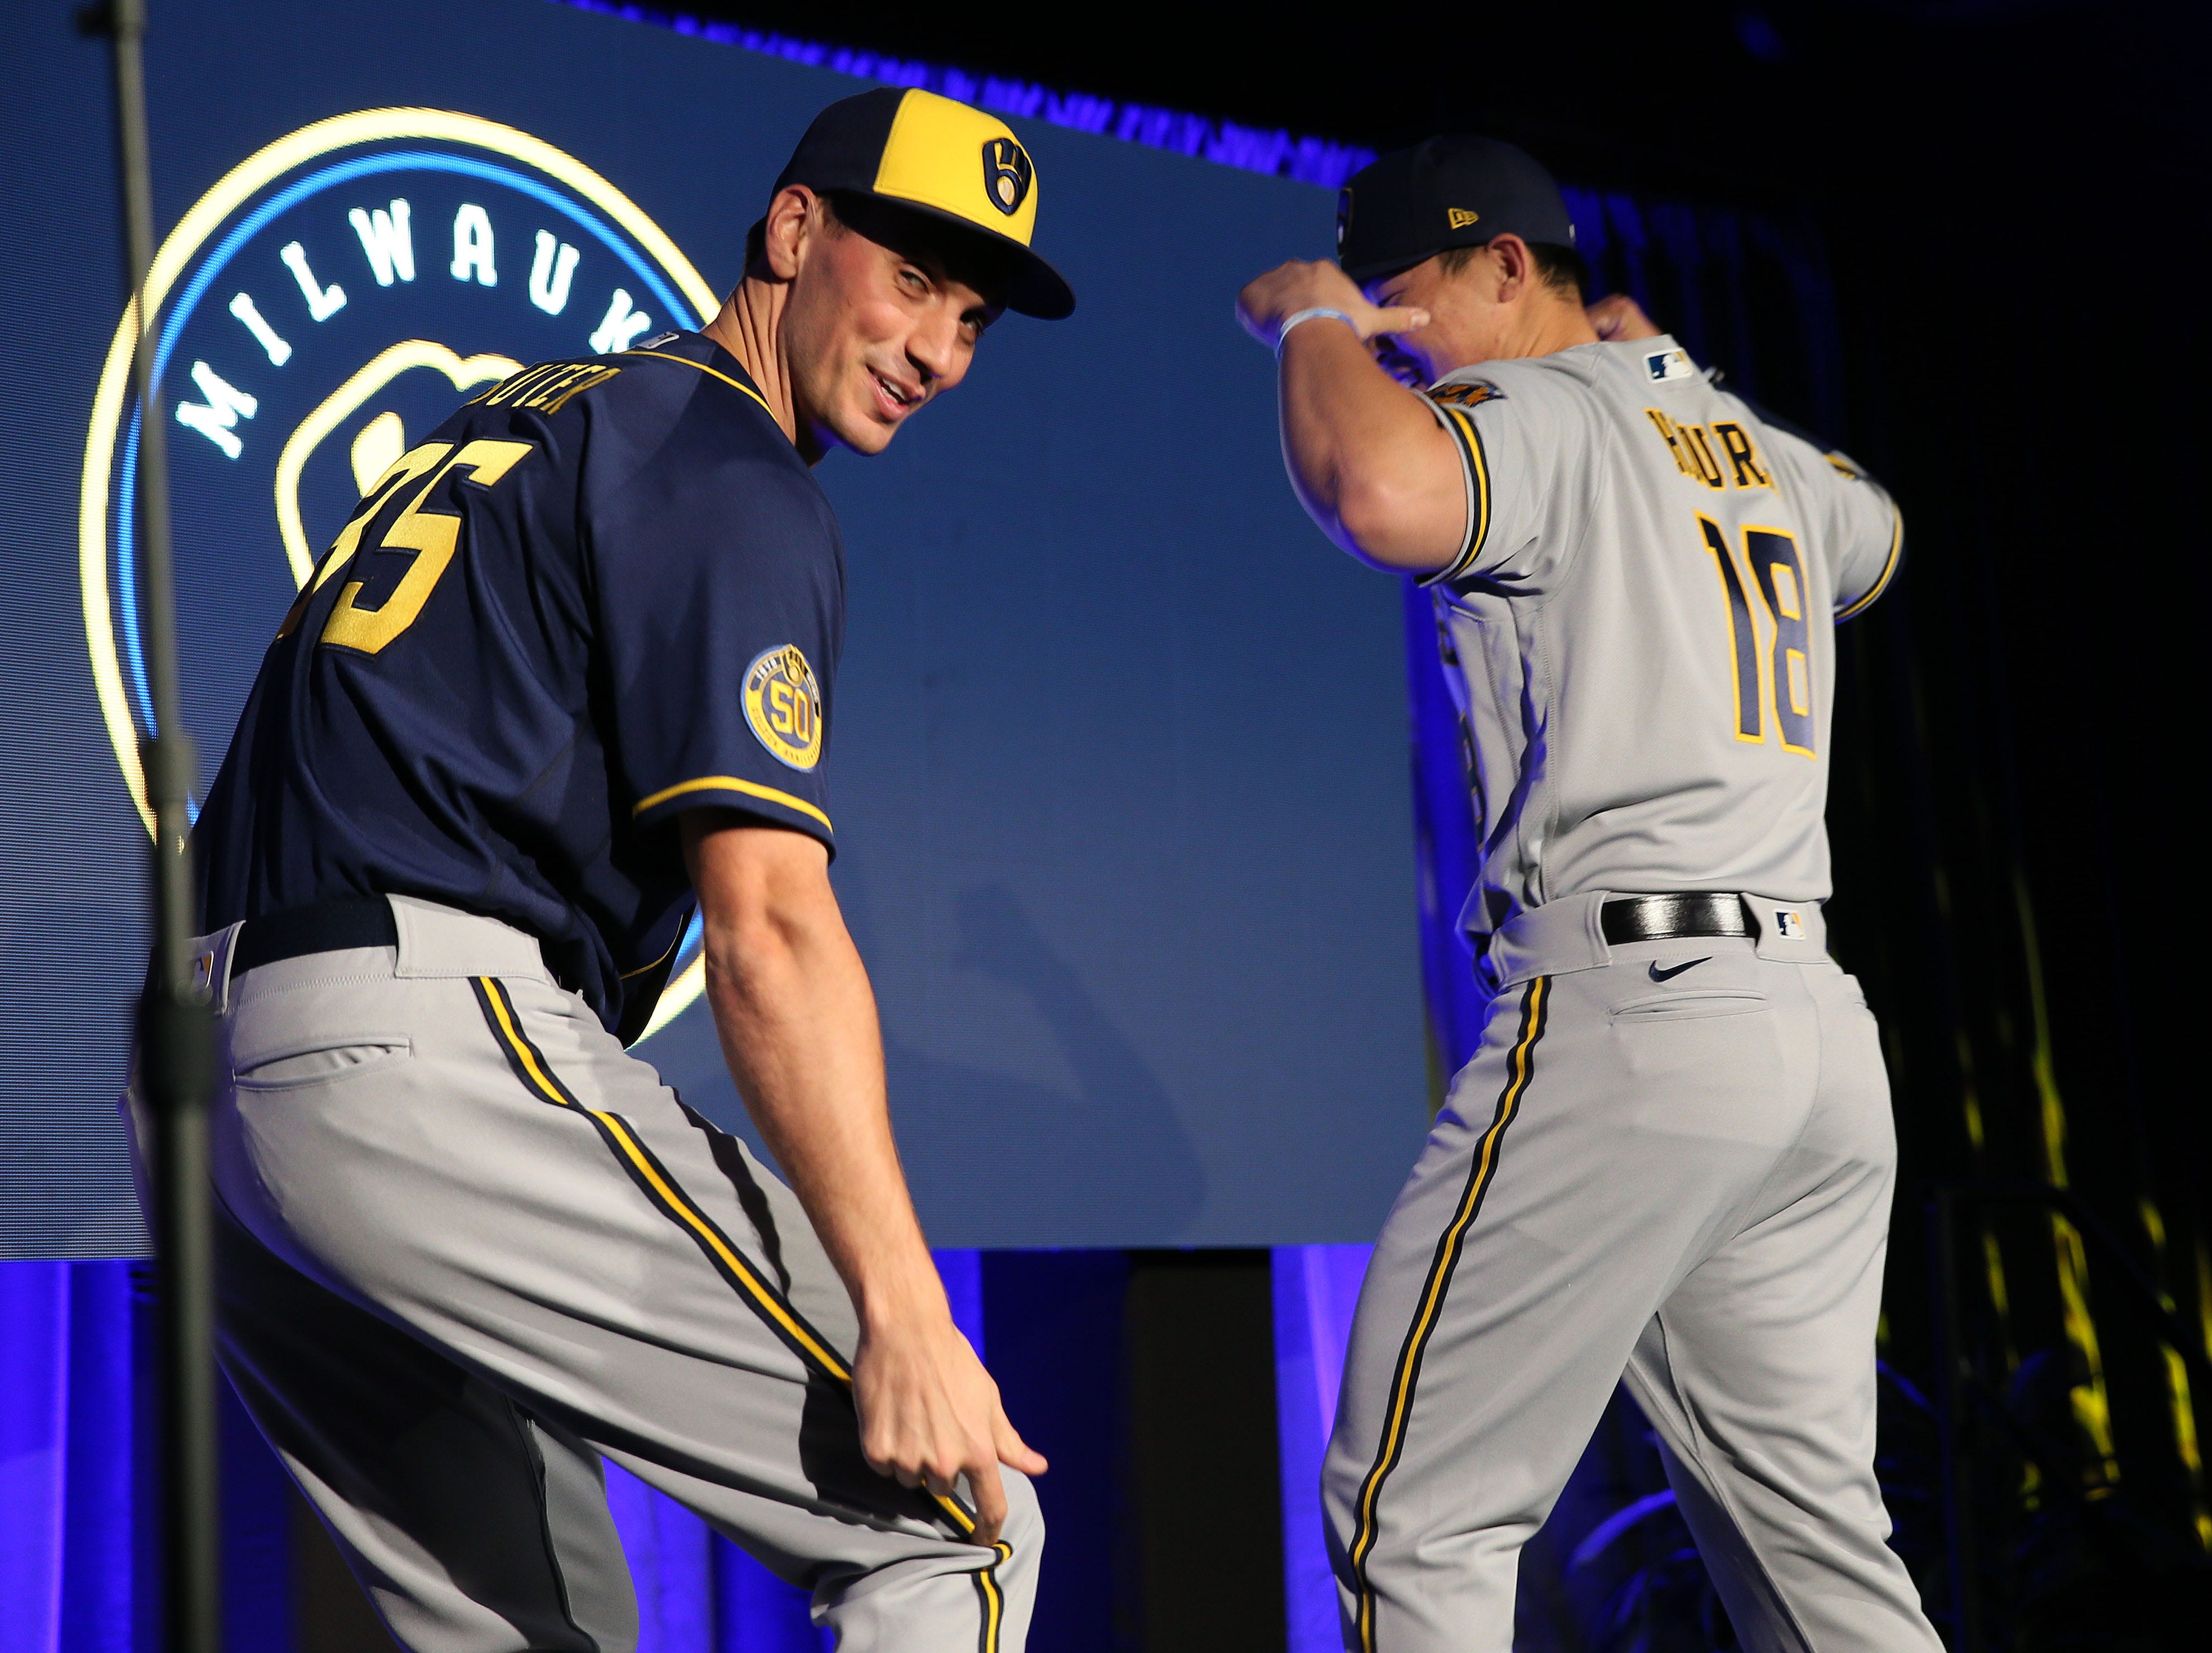 brewers 2020 uniforms